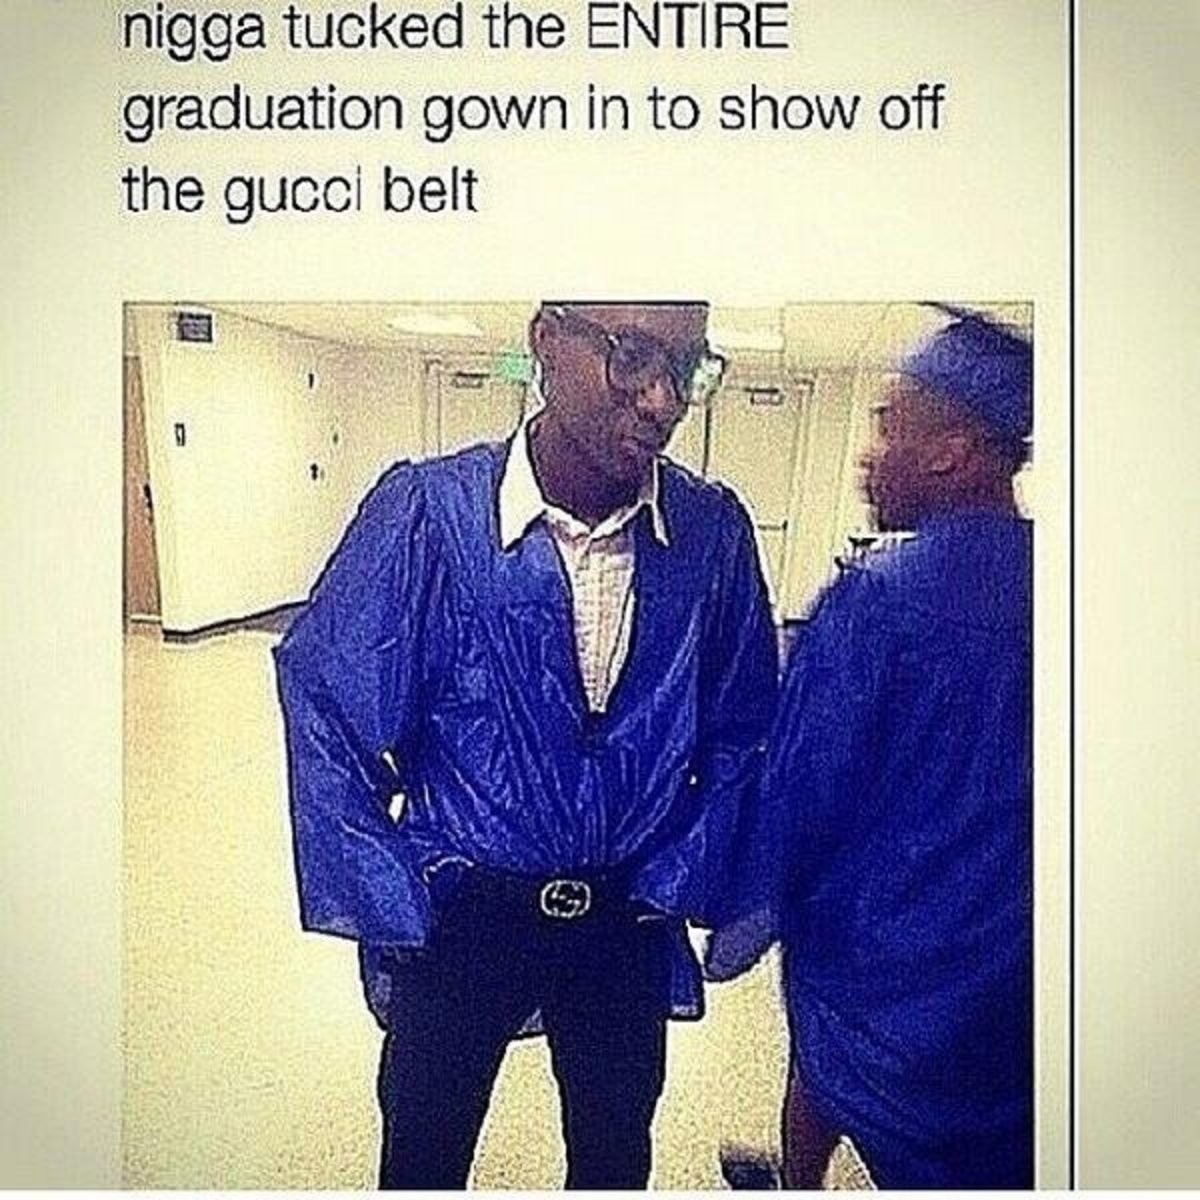 gucci belt meme - nigga tucked the Entire graduation gown in to show off the gucci belt